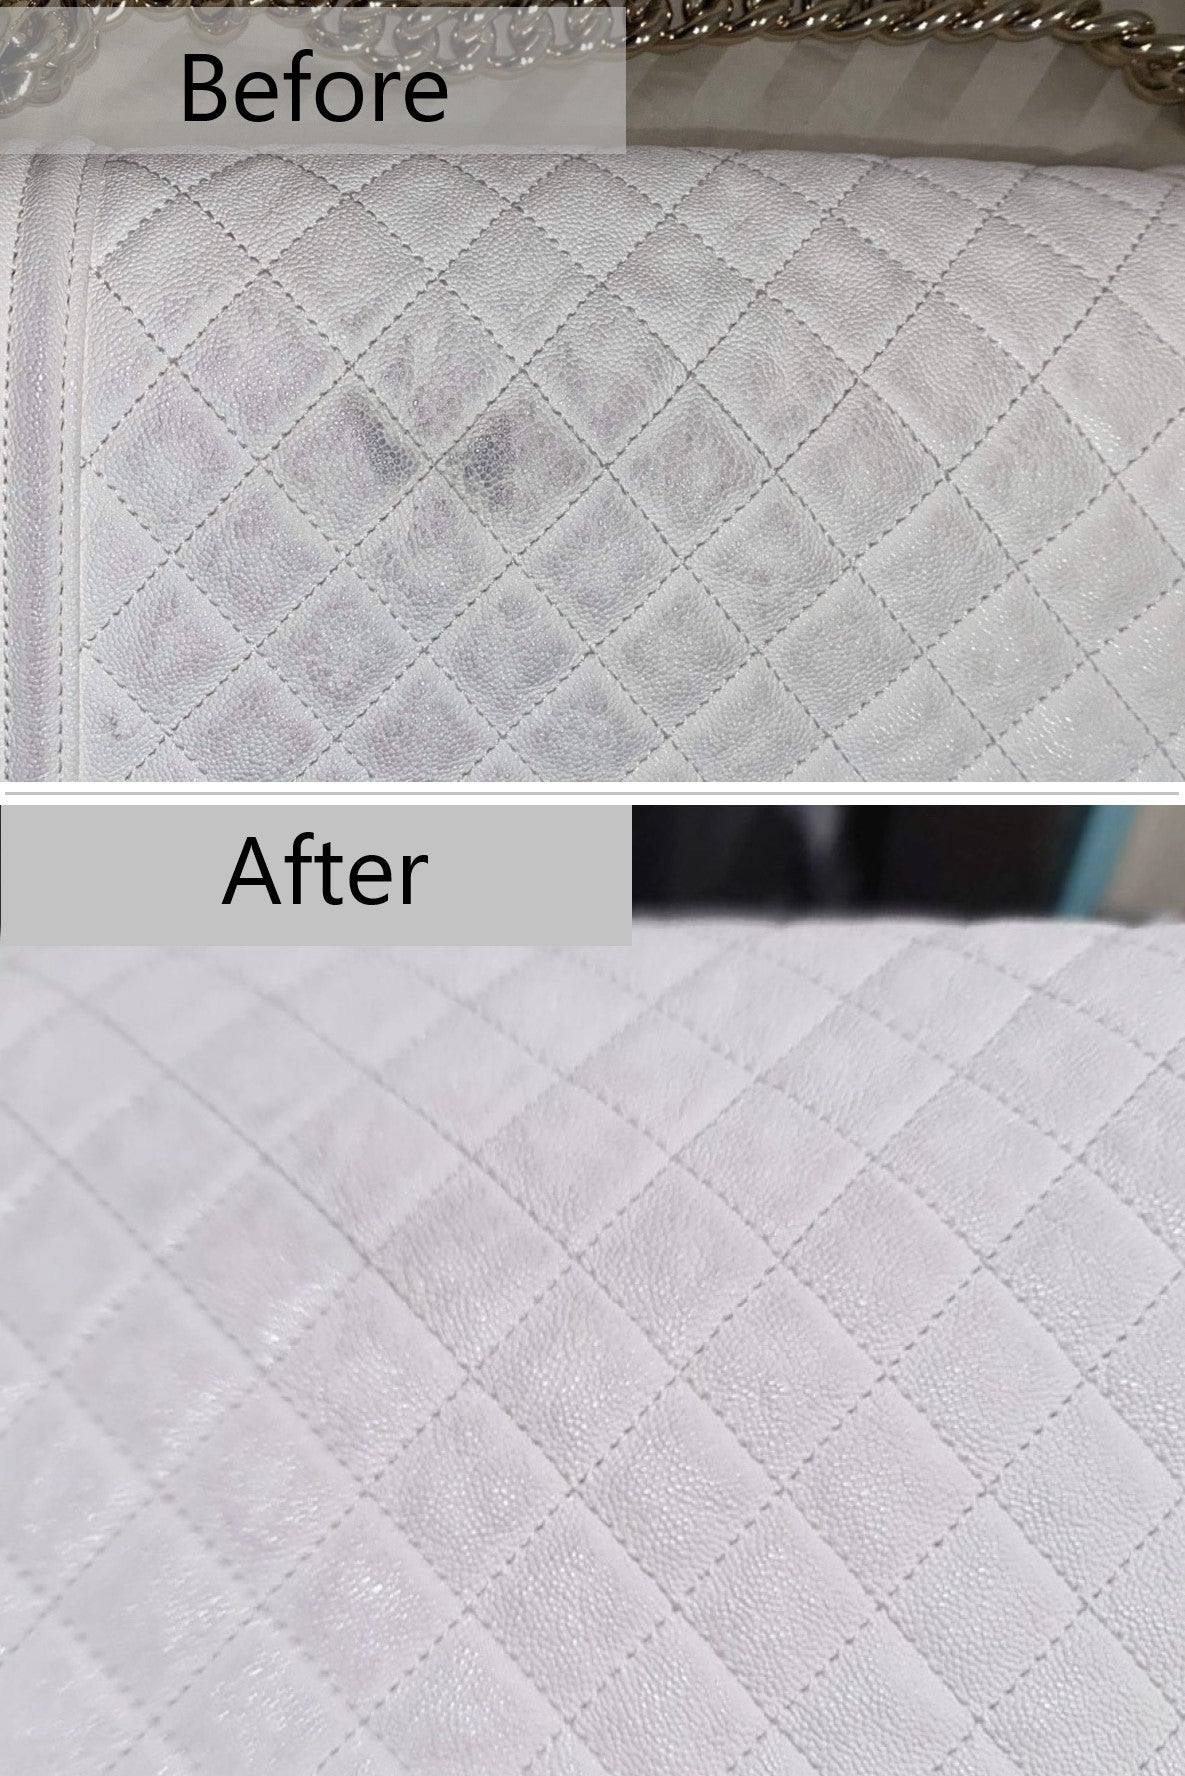 Safest Way to Remove Dye Transfer Stains From Colored & White